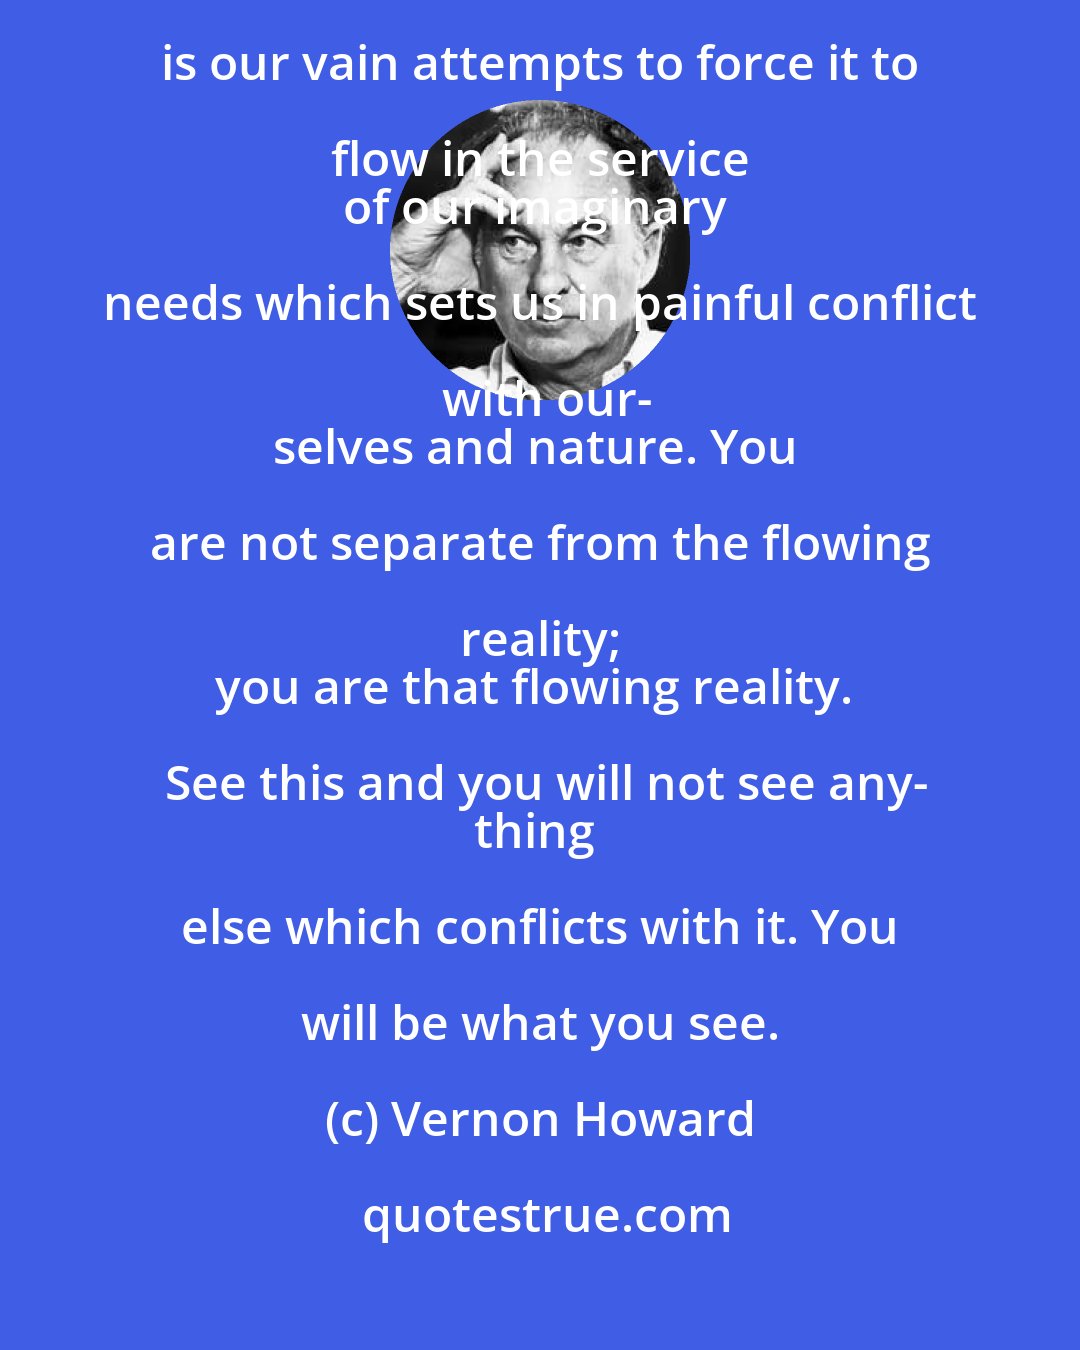 Vernon Howard: There is no way reality can be prevented from flowing the way it 
flows. It is our vain attempts to force it to flow in the service 
of our imaginary needs which sets us in painful conflict with our-
selves and nature. You are not separate from the flowing reality; 
you are that flowing reality. See this and you will not see any-
thing else which conflicts with it. You will be what you see.